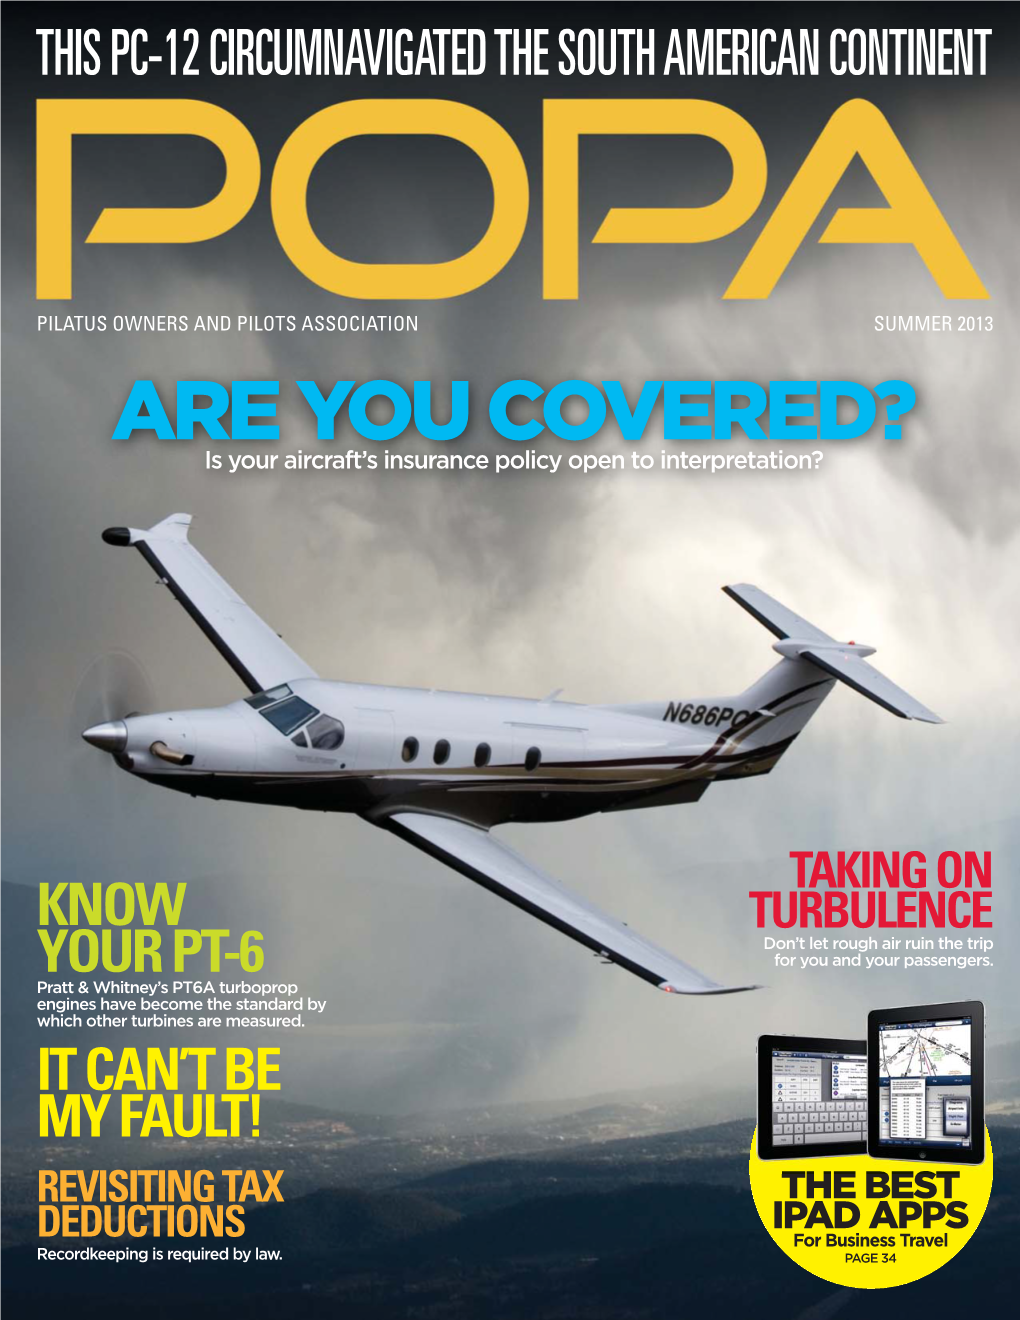 ARE YOU COVERED? Is Your Aircraft’S Insurance Policy Open to Interpretation?